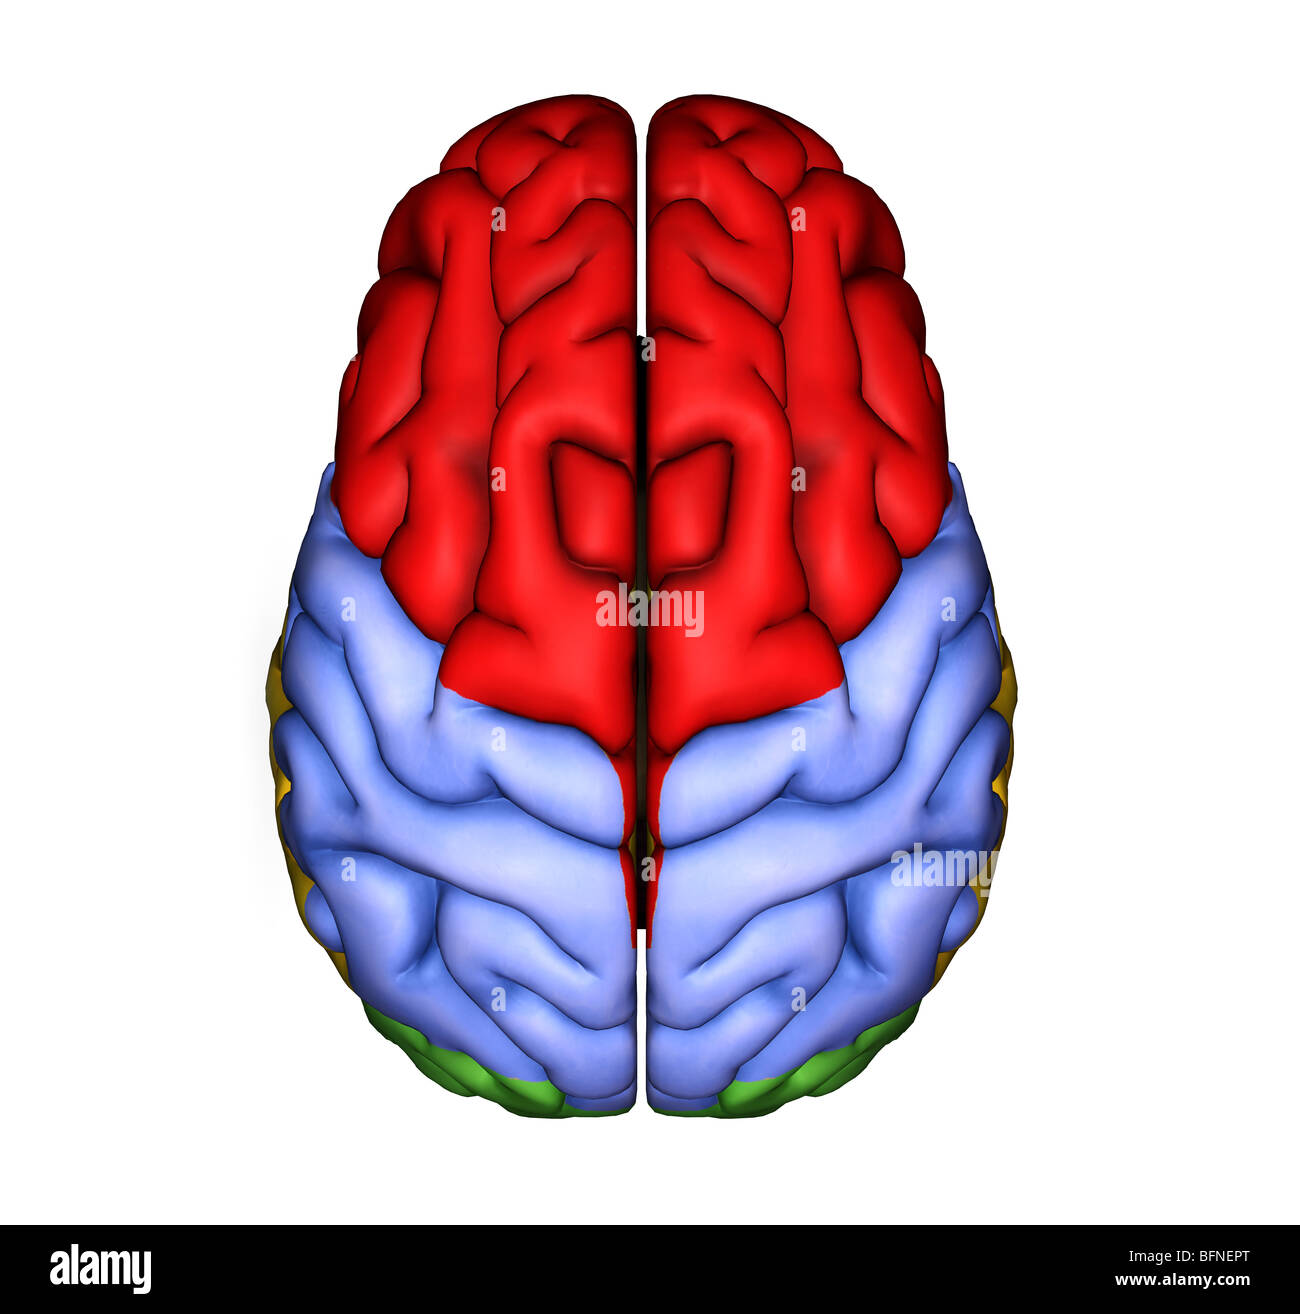 Illustration of the surface of the human brain seen from above Stock Photo